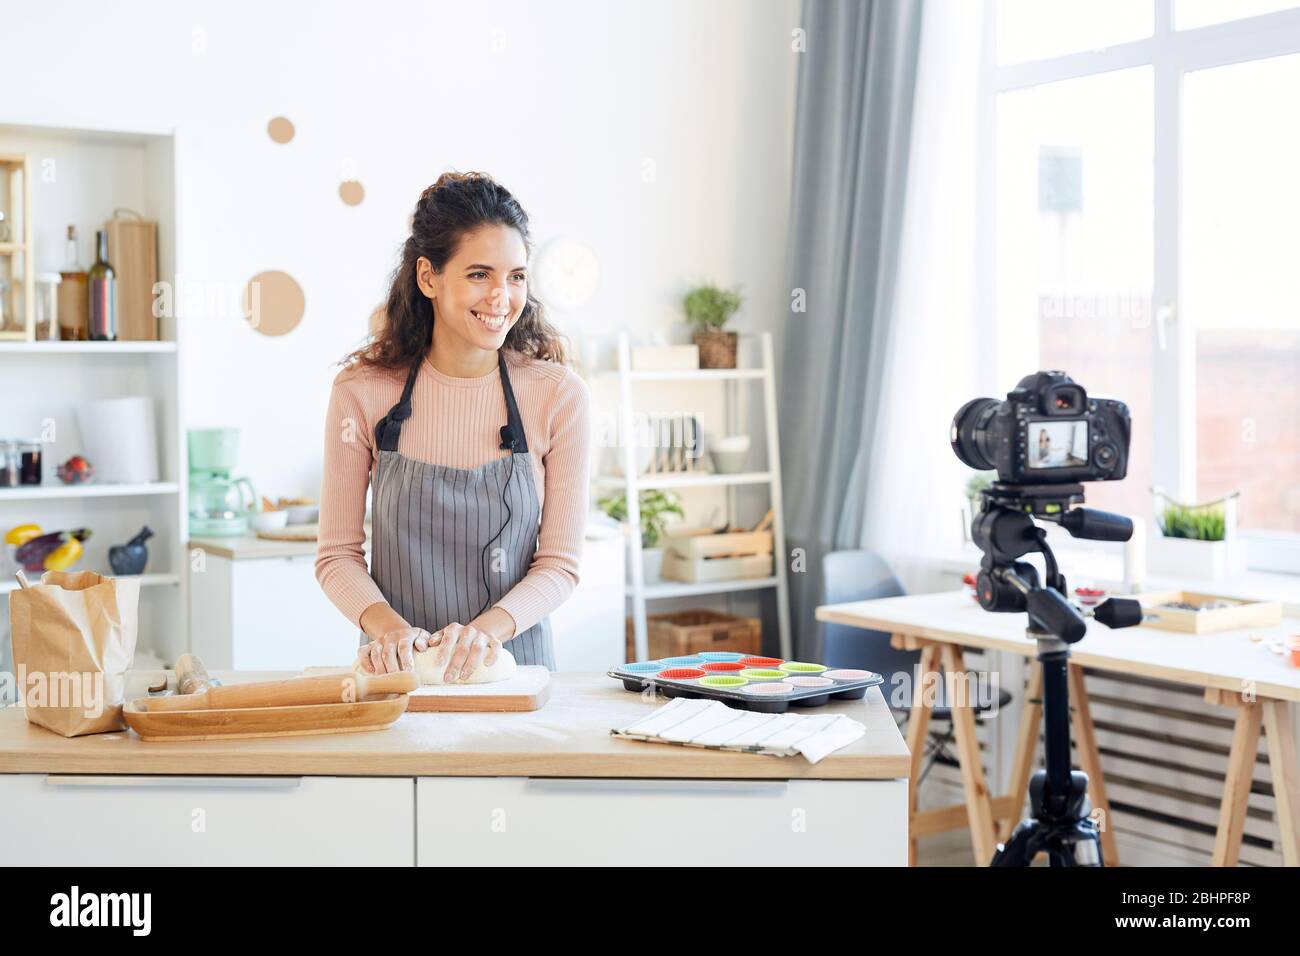 Smiling young woman kneading dough for cupcakes while shooting video for her food blog Stock Photo